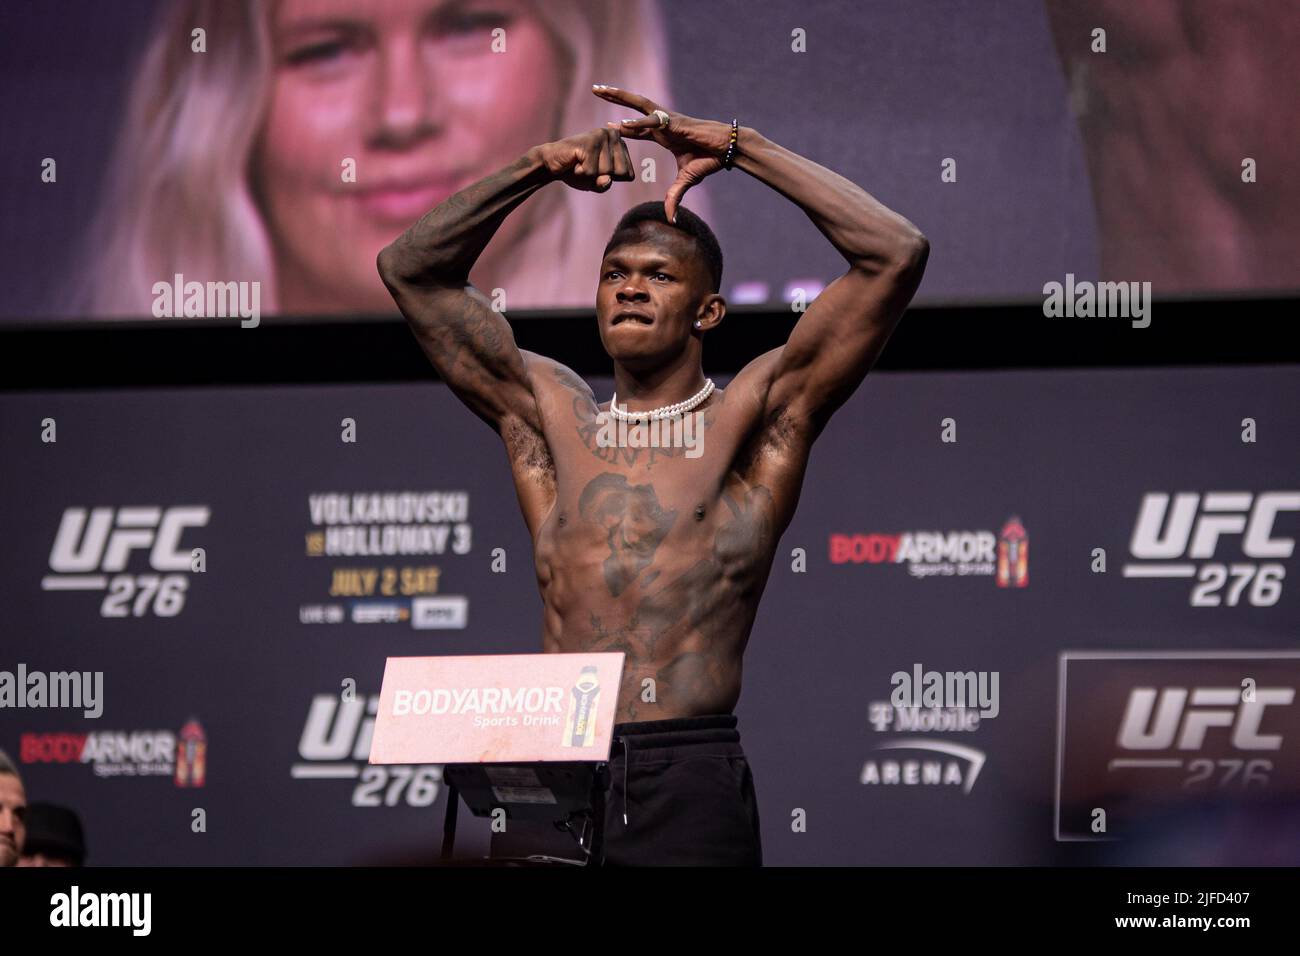 Las Vegas, USA. 01st July, 2022. LAS VEGAS, NV - July 1: Israel Adasenya Stands one the Scales at the UFC International Fight Week: Ceremonial Weigh Ins at T-Mobile Arena, ahead of his title bout on July 2nd, Las Vegas, NV, United States. (Photo by Matt Davies/PxImages) Credit: Px Images/Alamy Live News Stock Photo